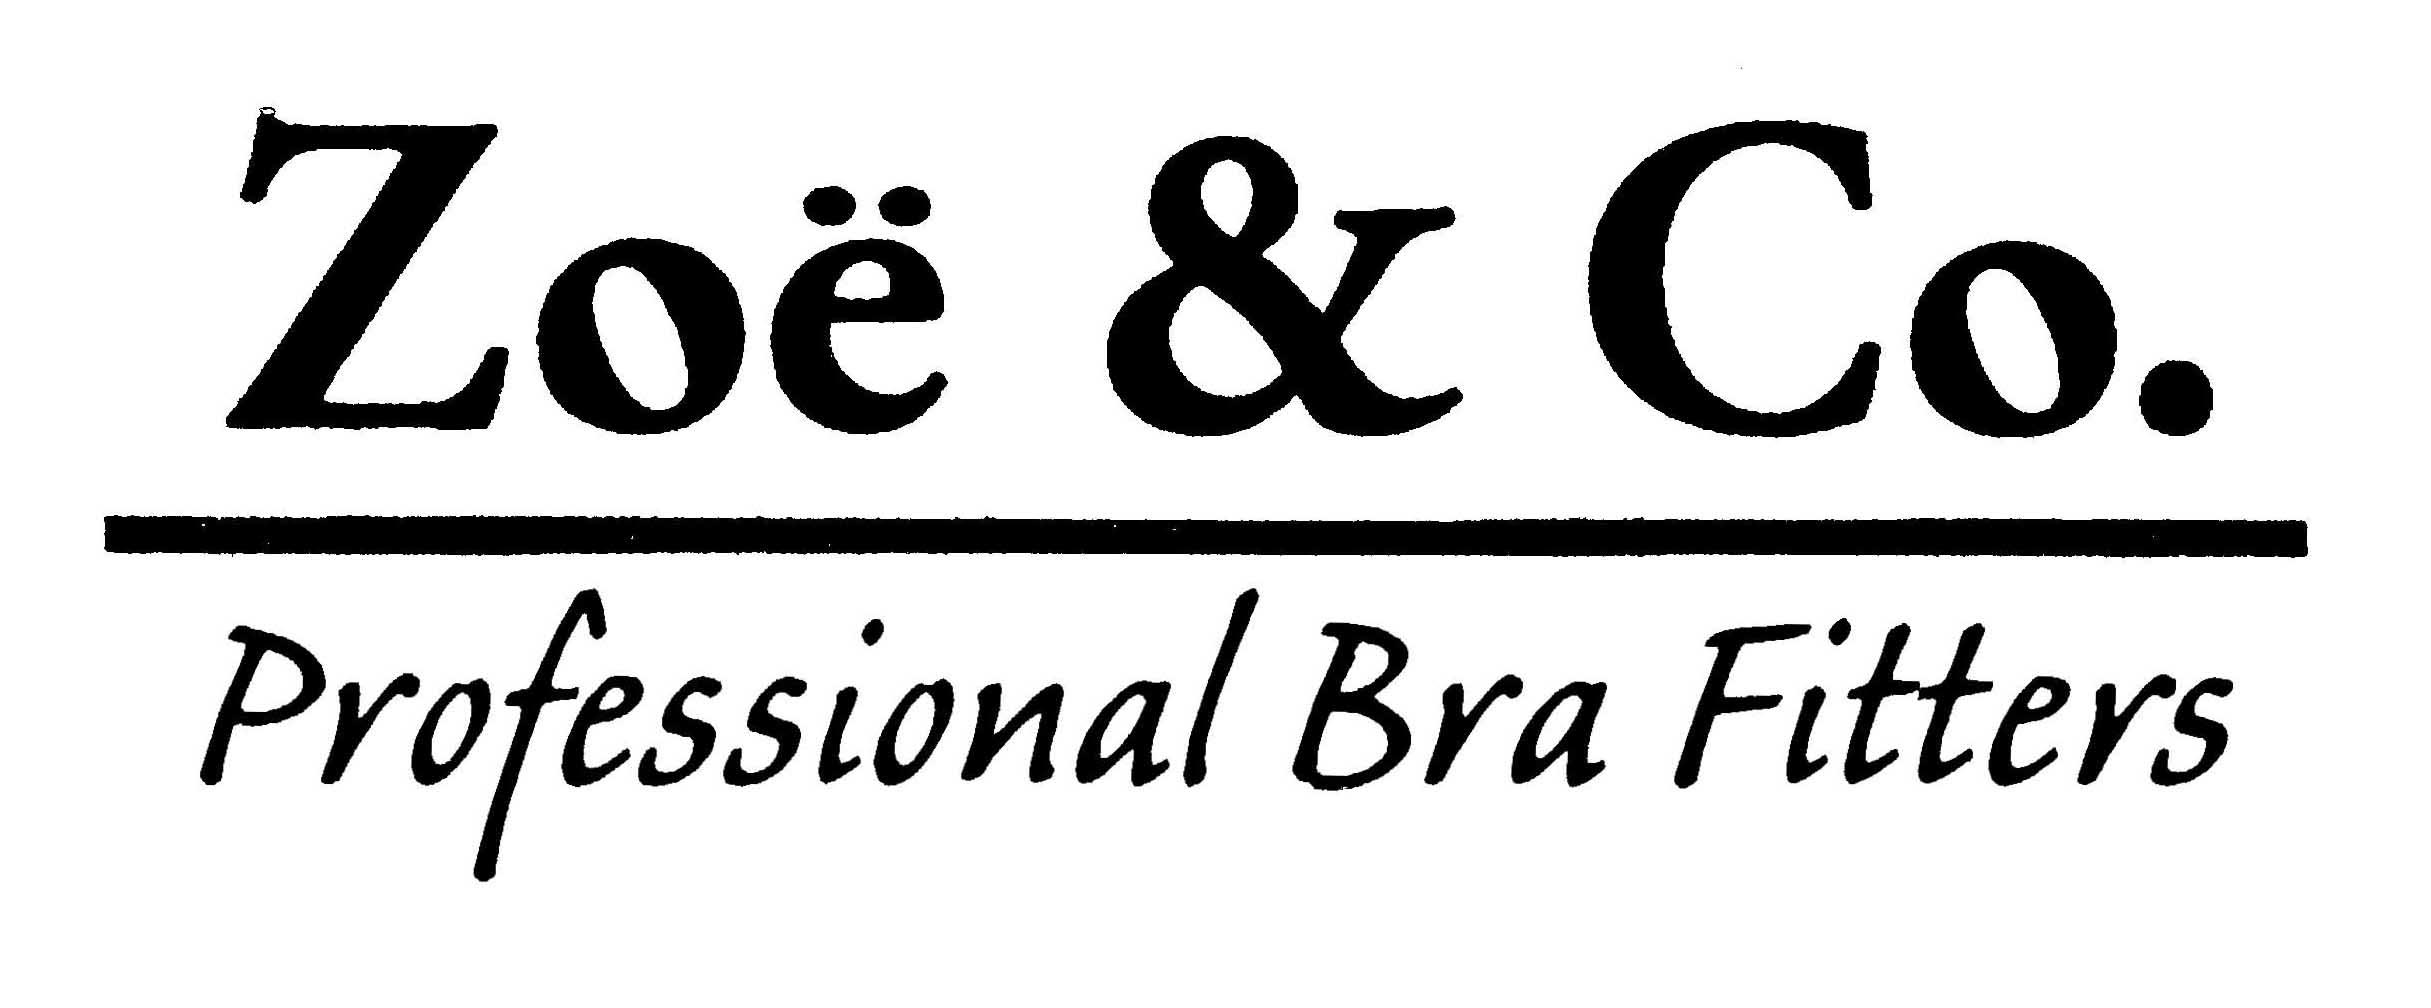 Zoe & Co., Professional Bra Fitters - Hyannis Main Street Business  Improvement District